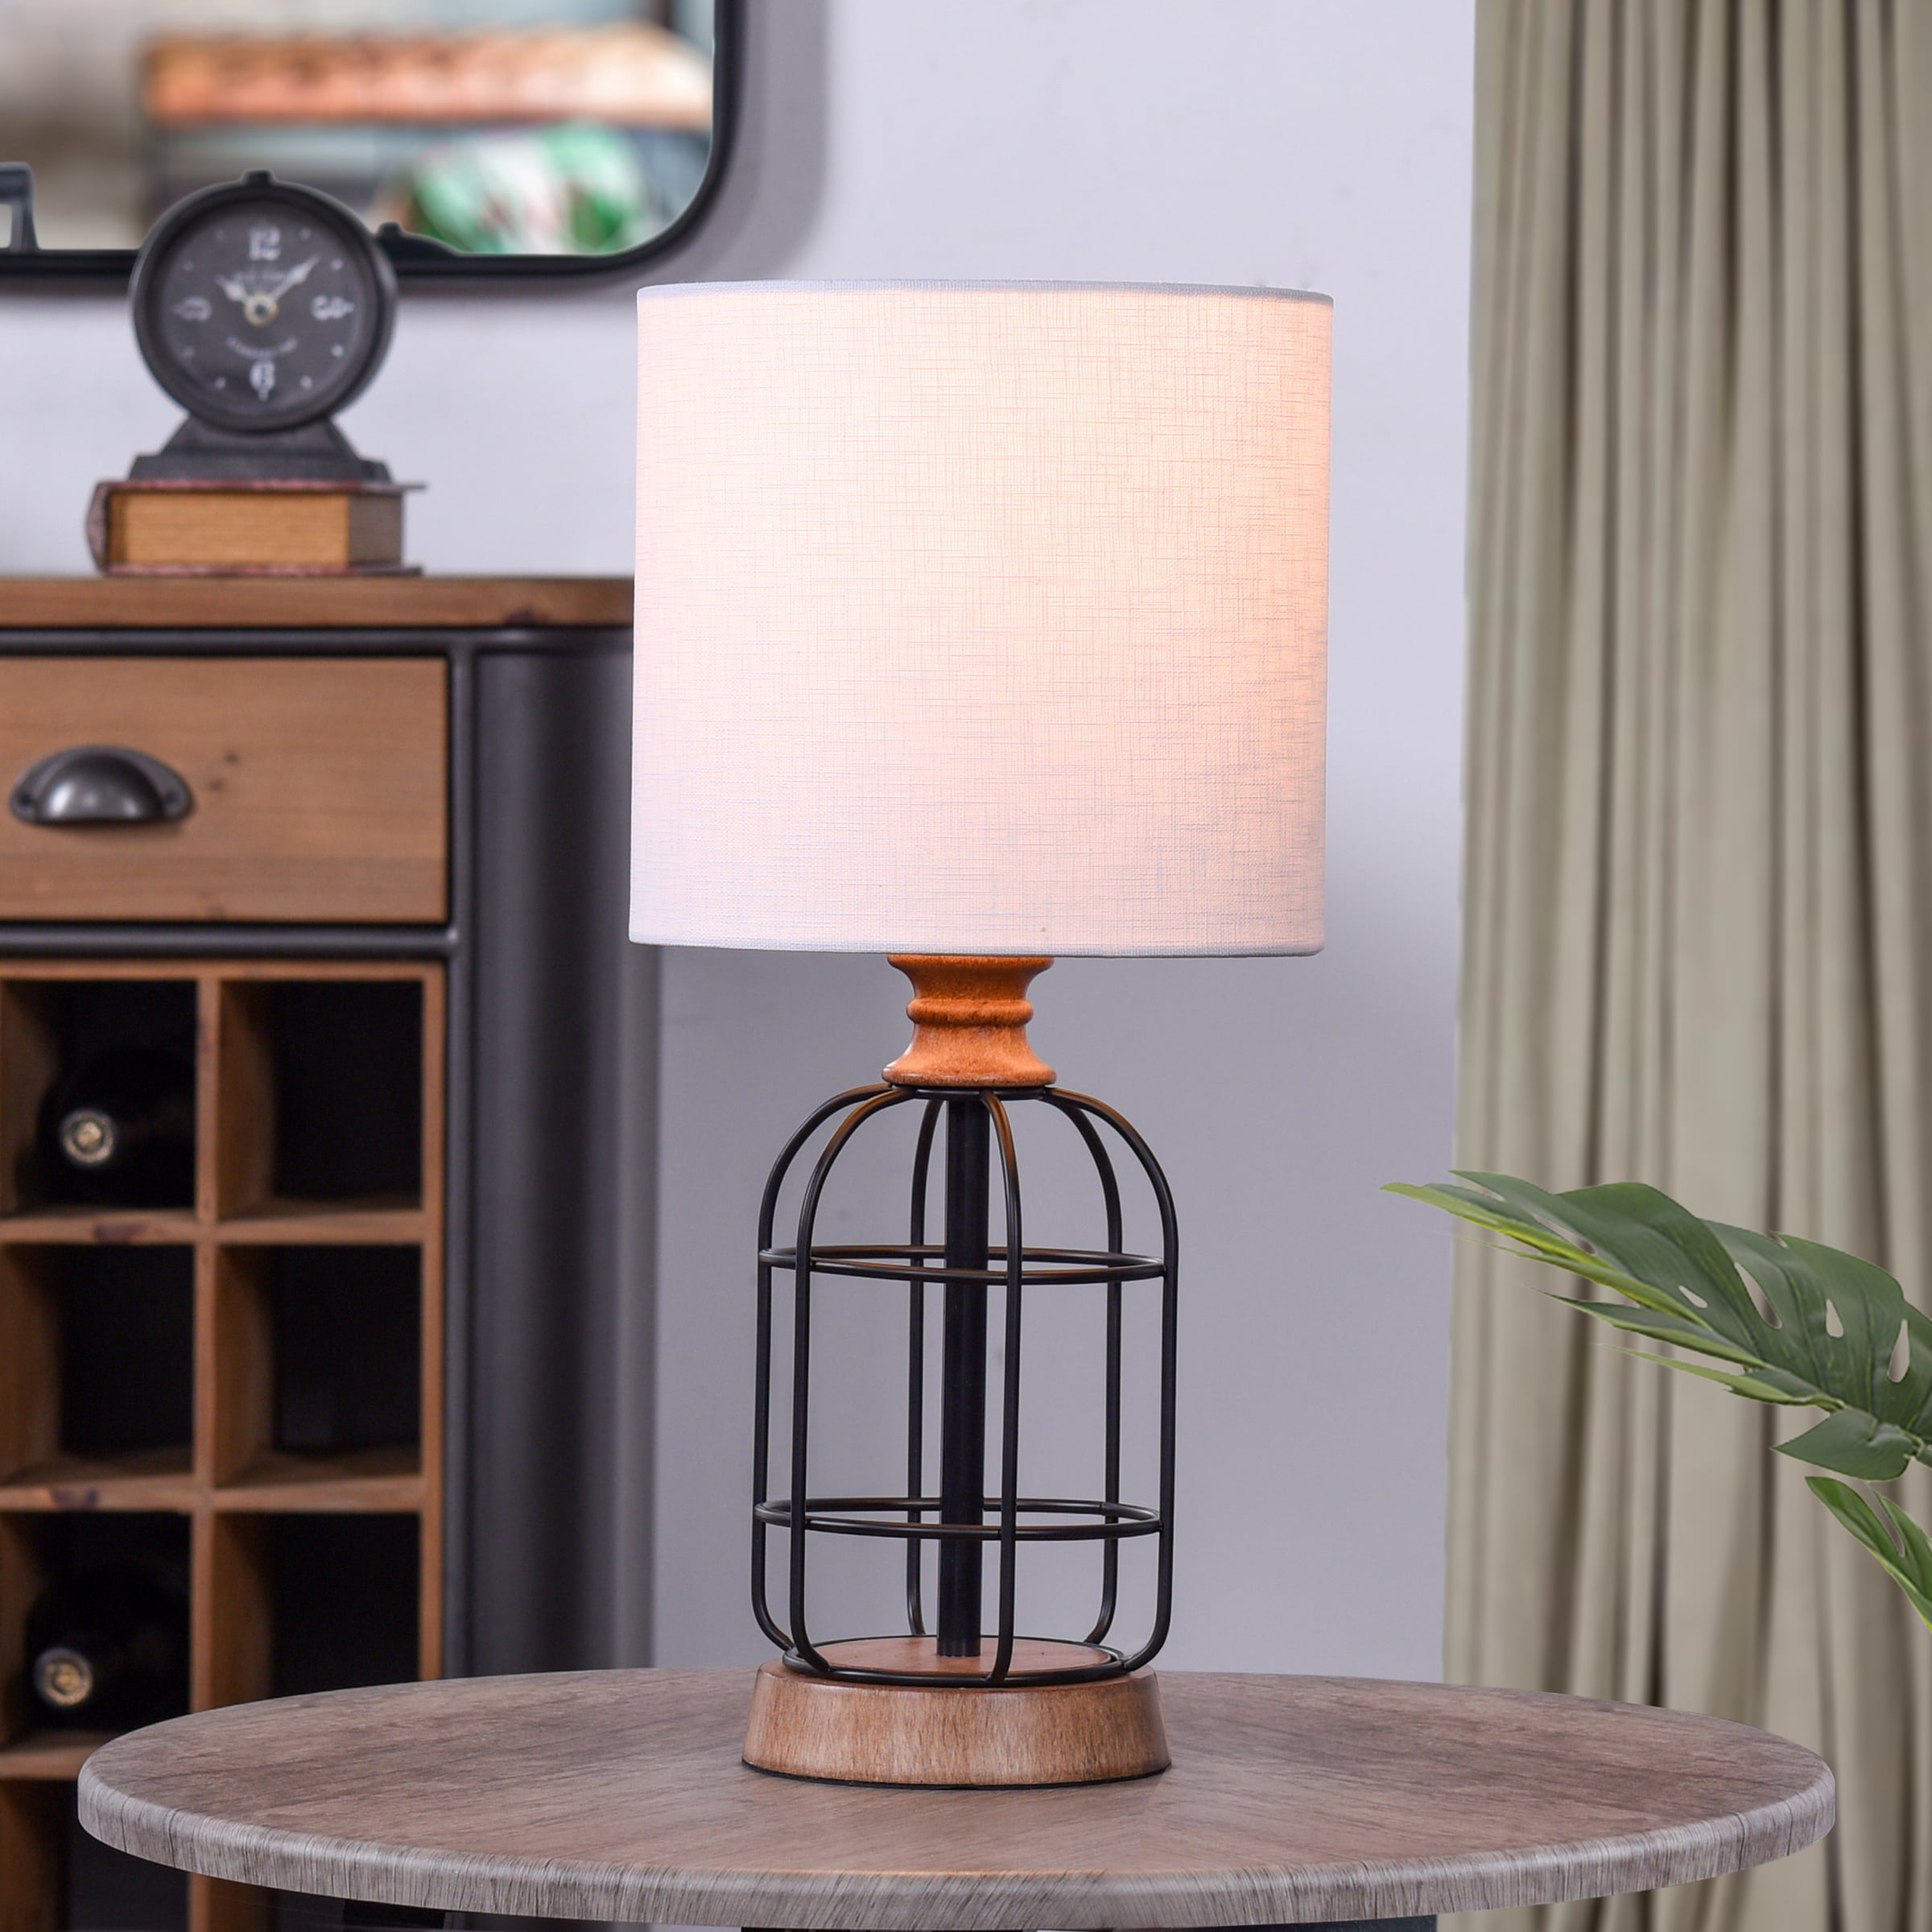 Mainstays Black Metal Cage Table Lamp with Wood Accents and Drum Shade， bulb included， 17